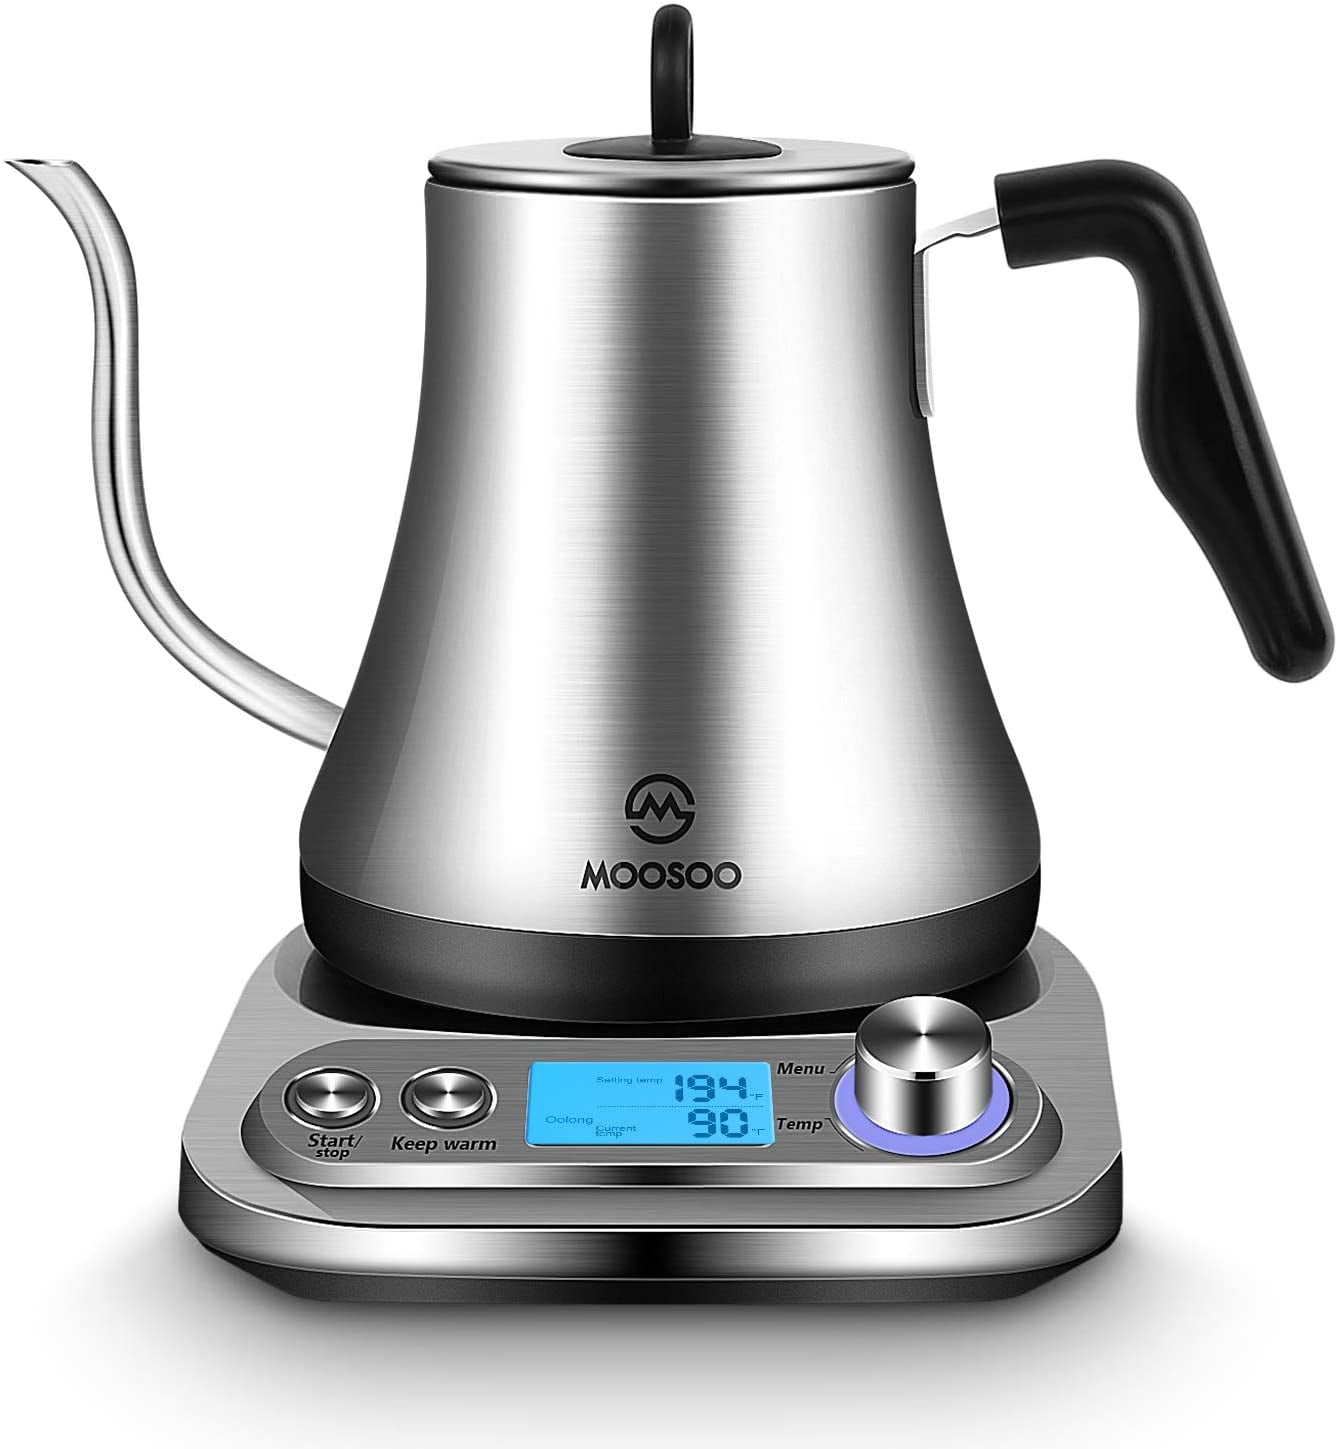 Electric Kettle with Thermometer Stainless Steel 1.5L 1000W Gooseneck Pour Over Coffee Tea Kettle, Hot Water Boiler Heater with Water Temperature